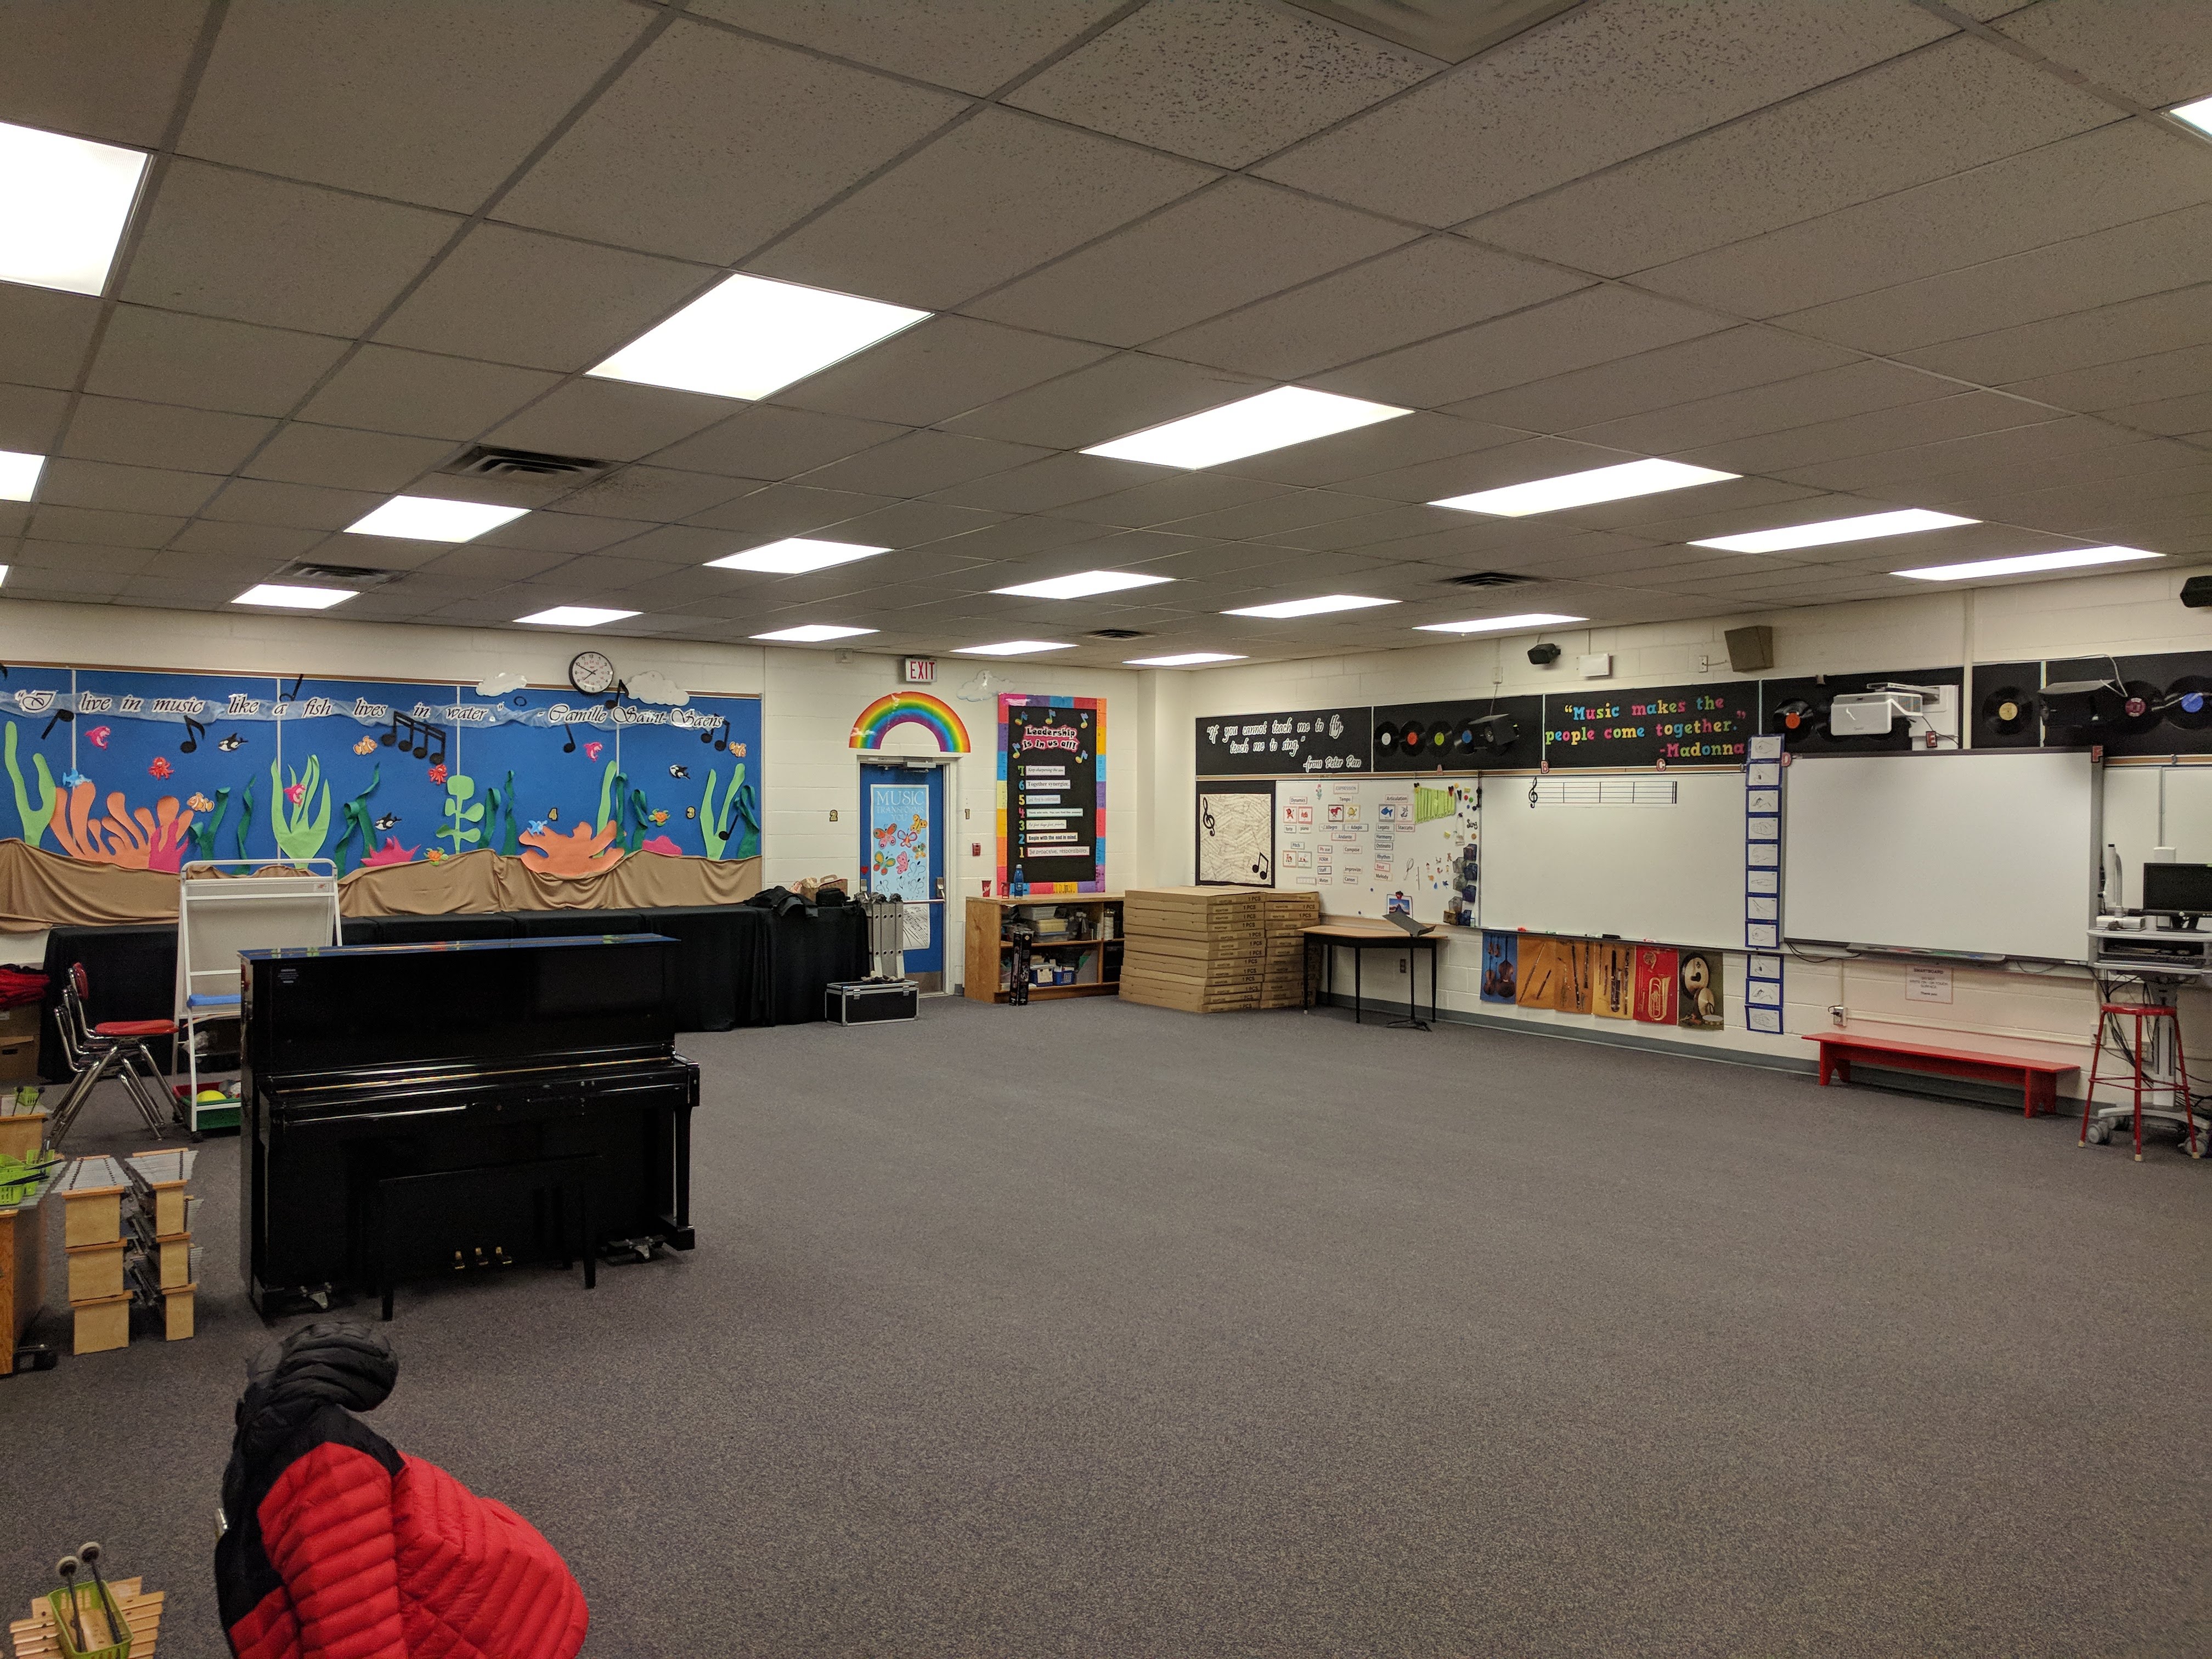 LED lighting solutions for a school